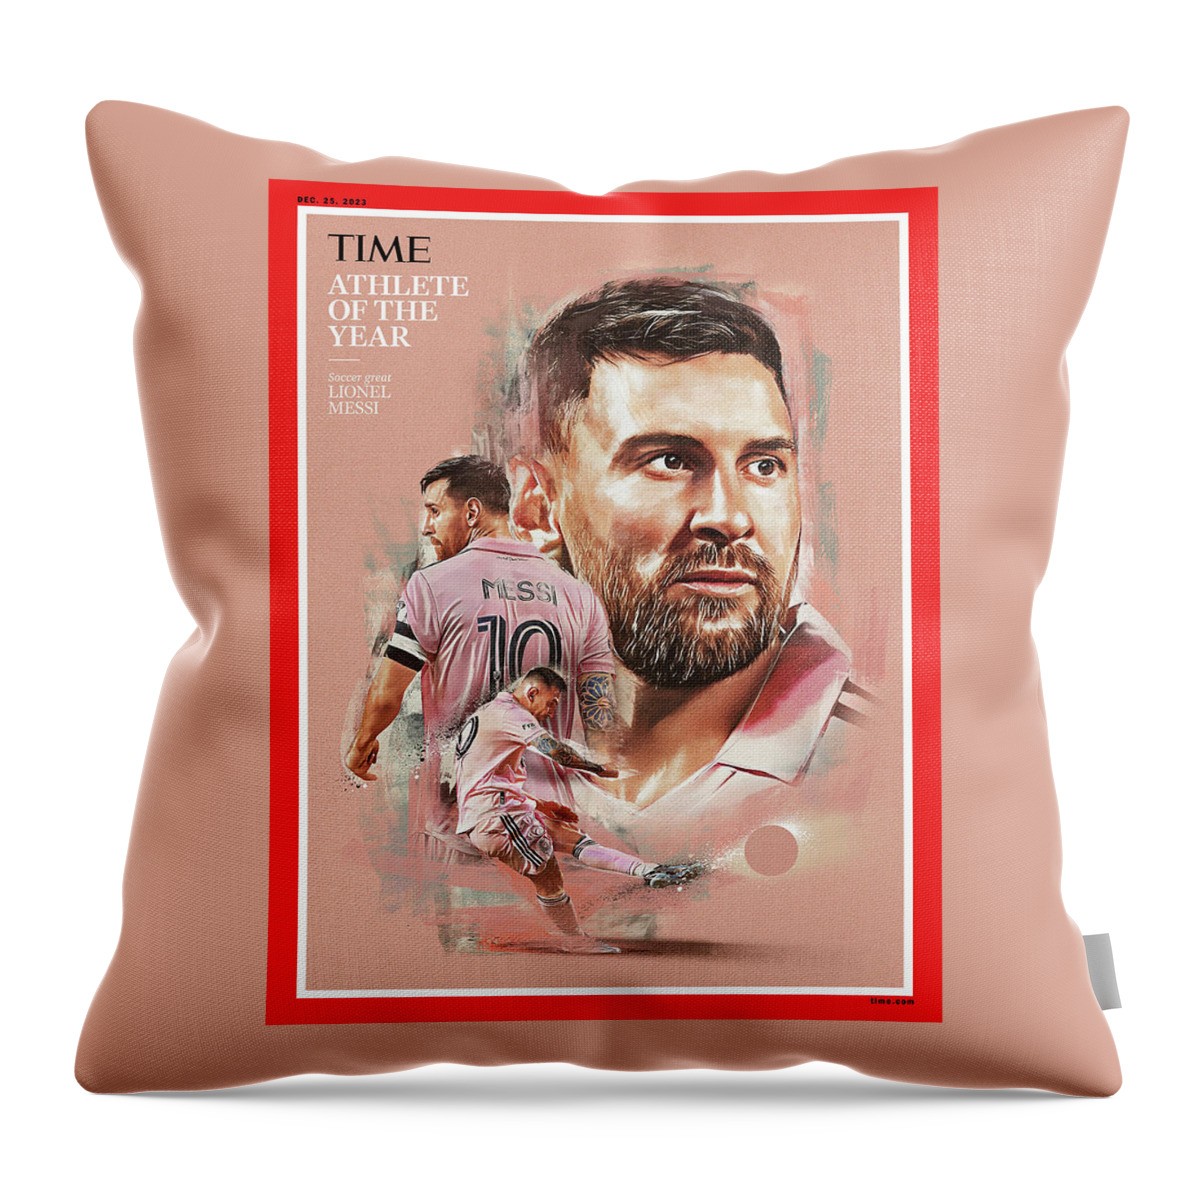 Lionel Messi Throw Pillow featuring the photograph Athlete of the Year-Lionel Messi by Neil Jamieson for Time